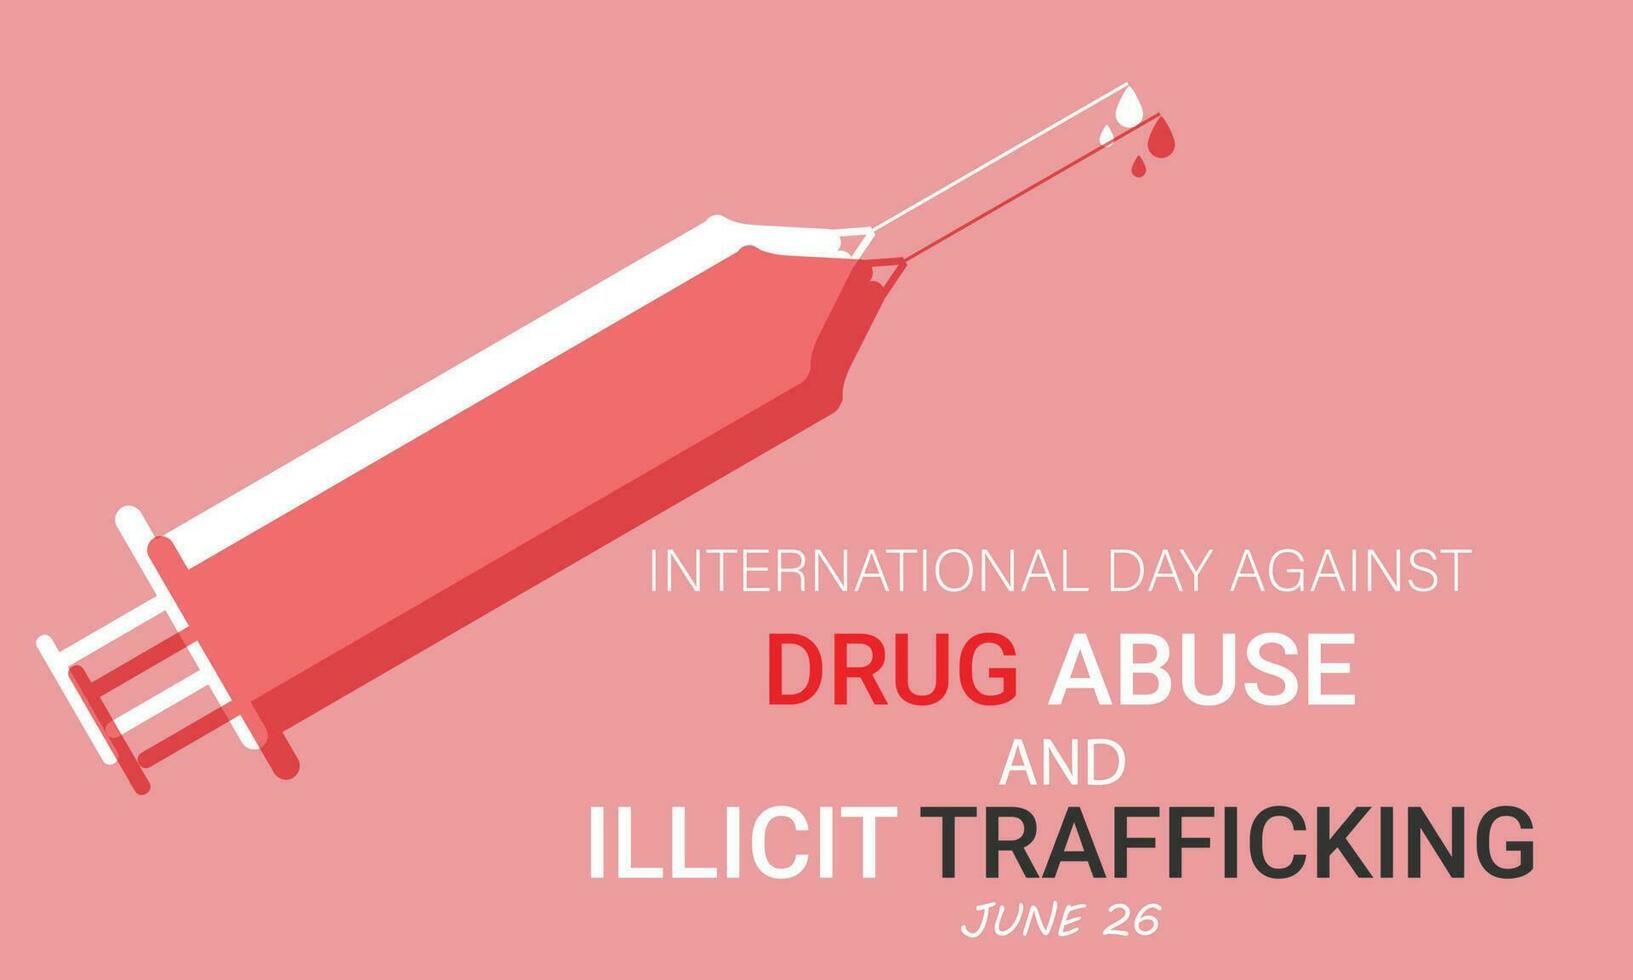 International day against drug abuse and illicit trafficking. background, banner, card, poster, template. Vector illustration.